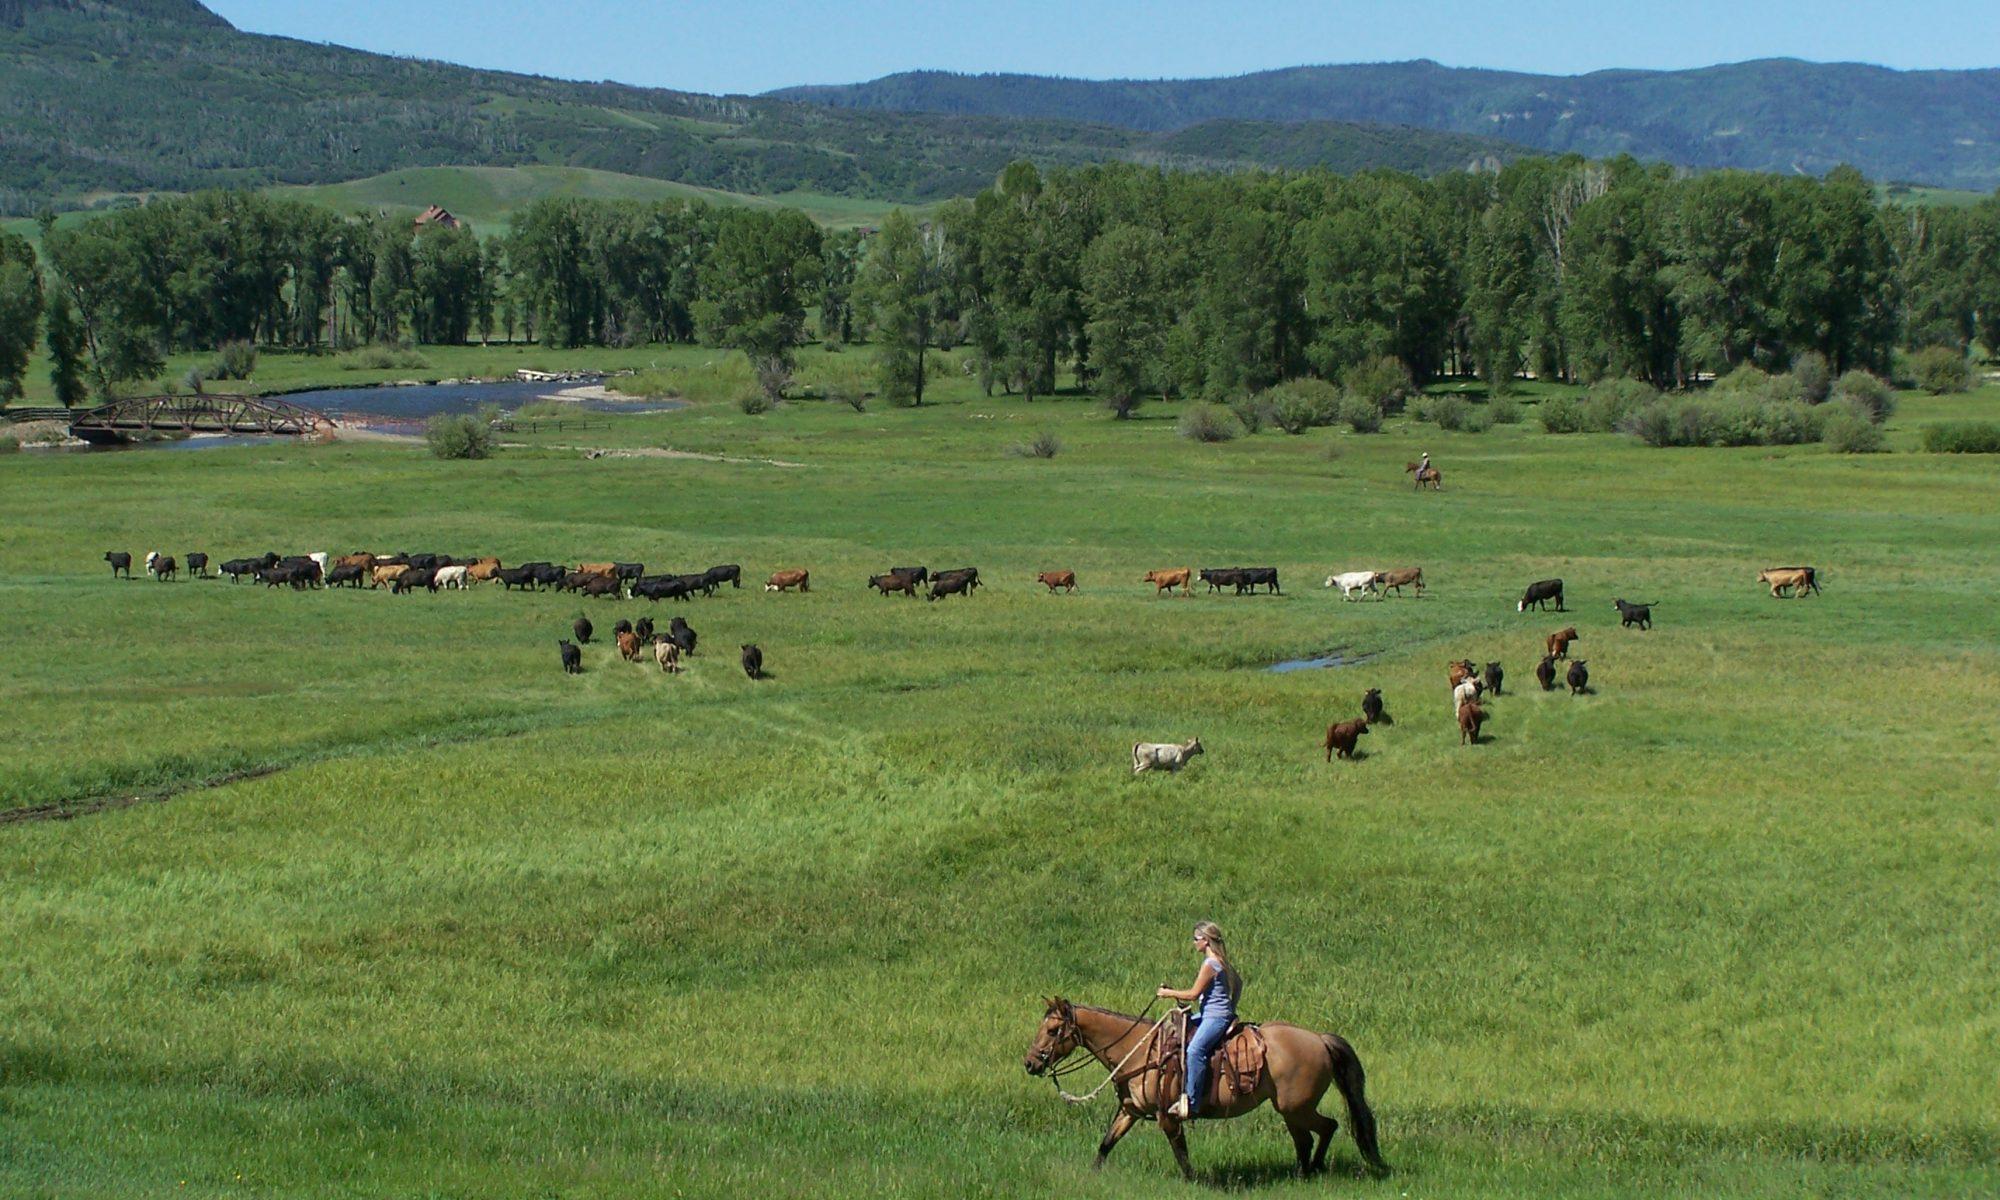 Christy Belton on horseback with her cows